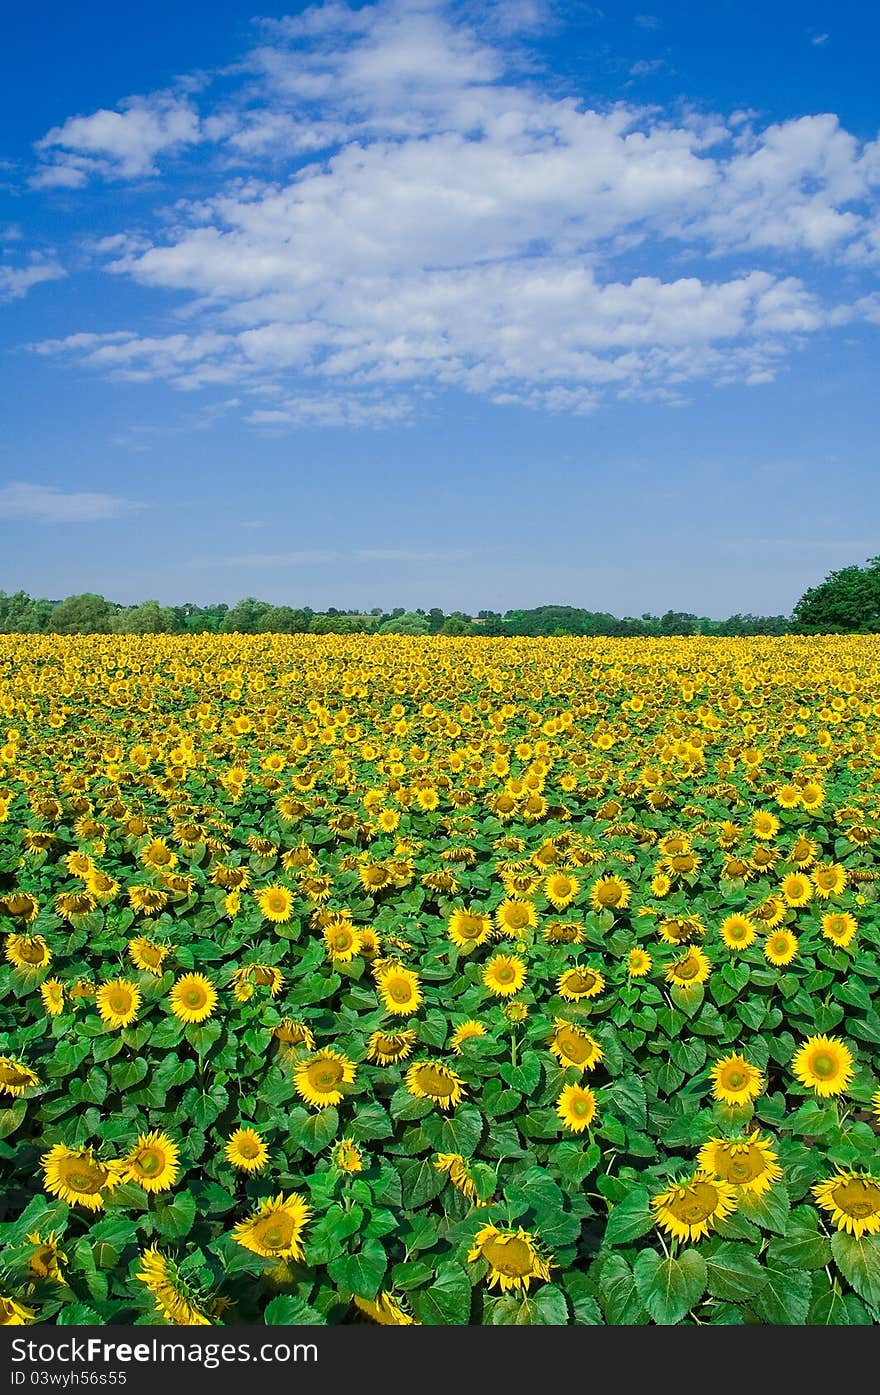 Sunflower Field with blue sky and clouds